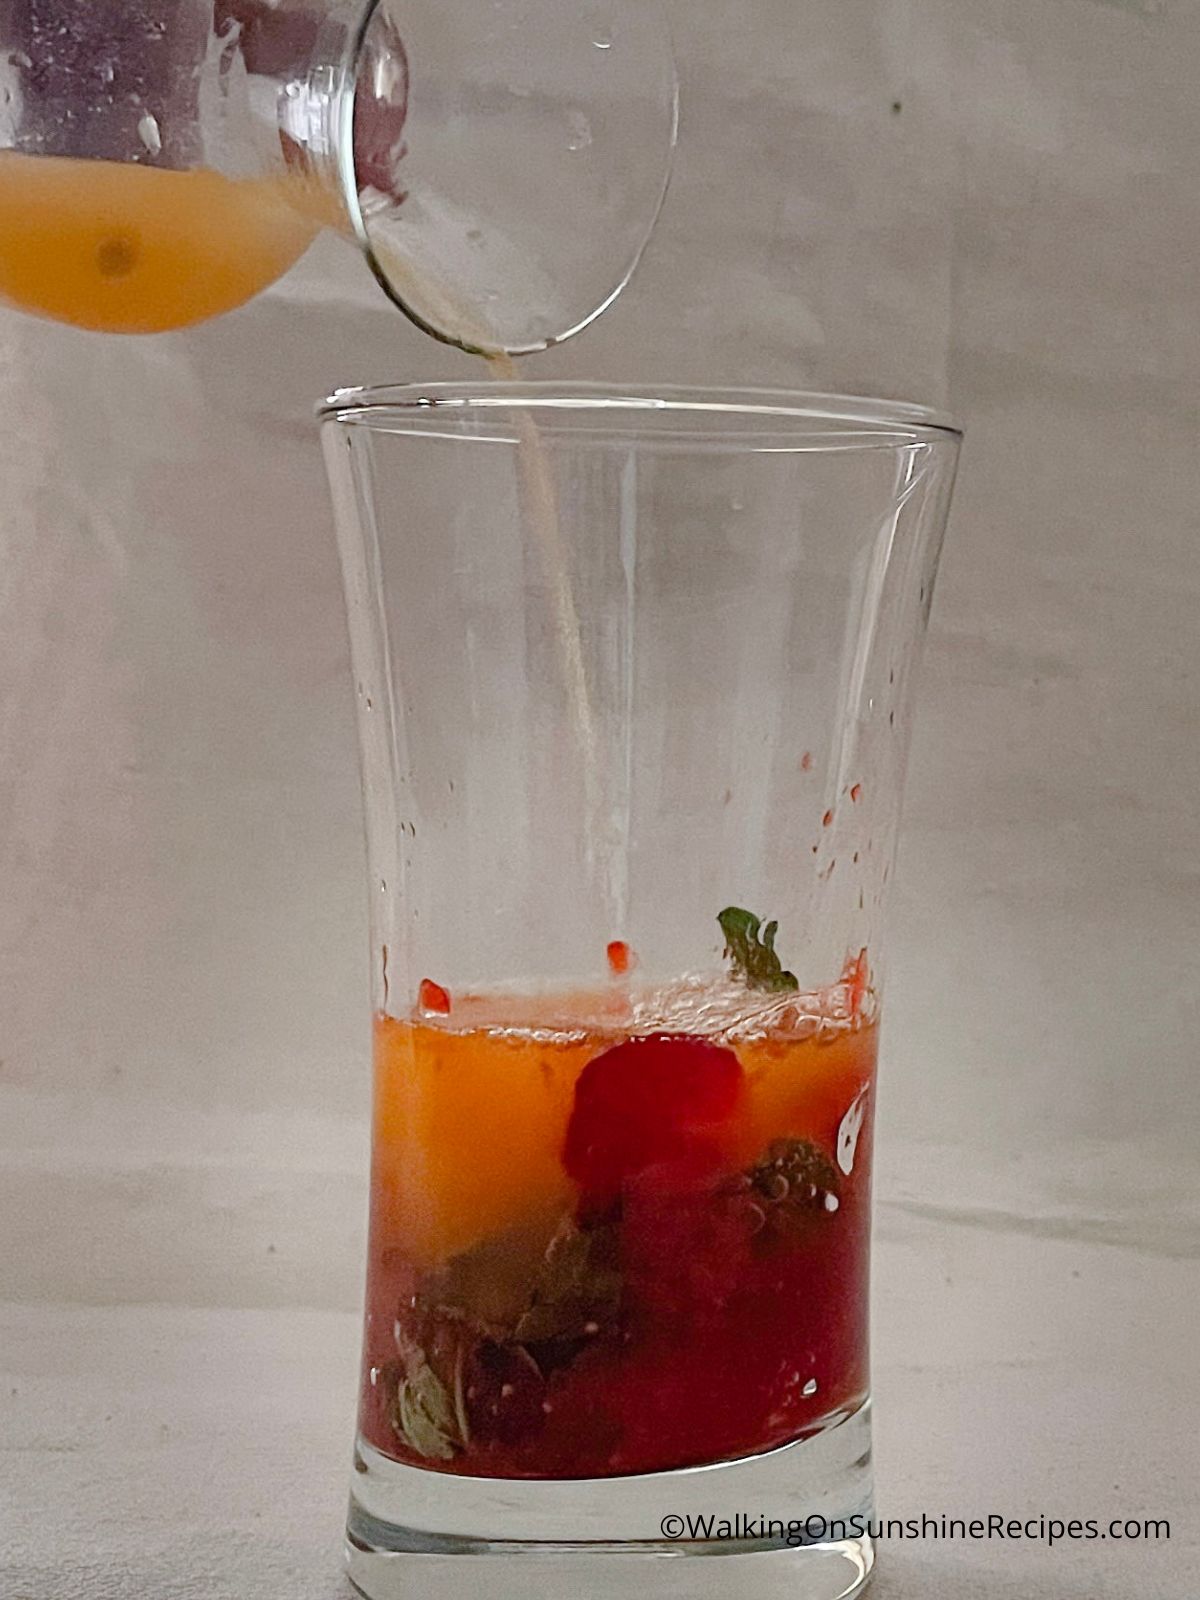 Add the seltzer water to the crush fruit and fresh mint.